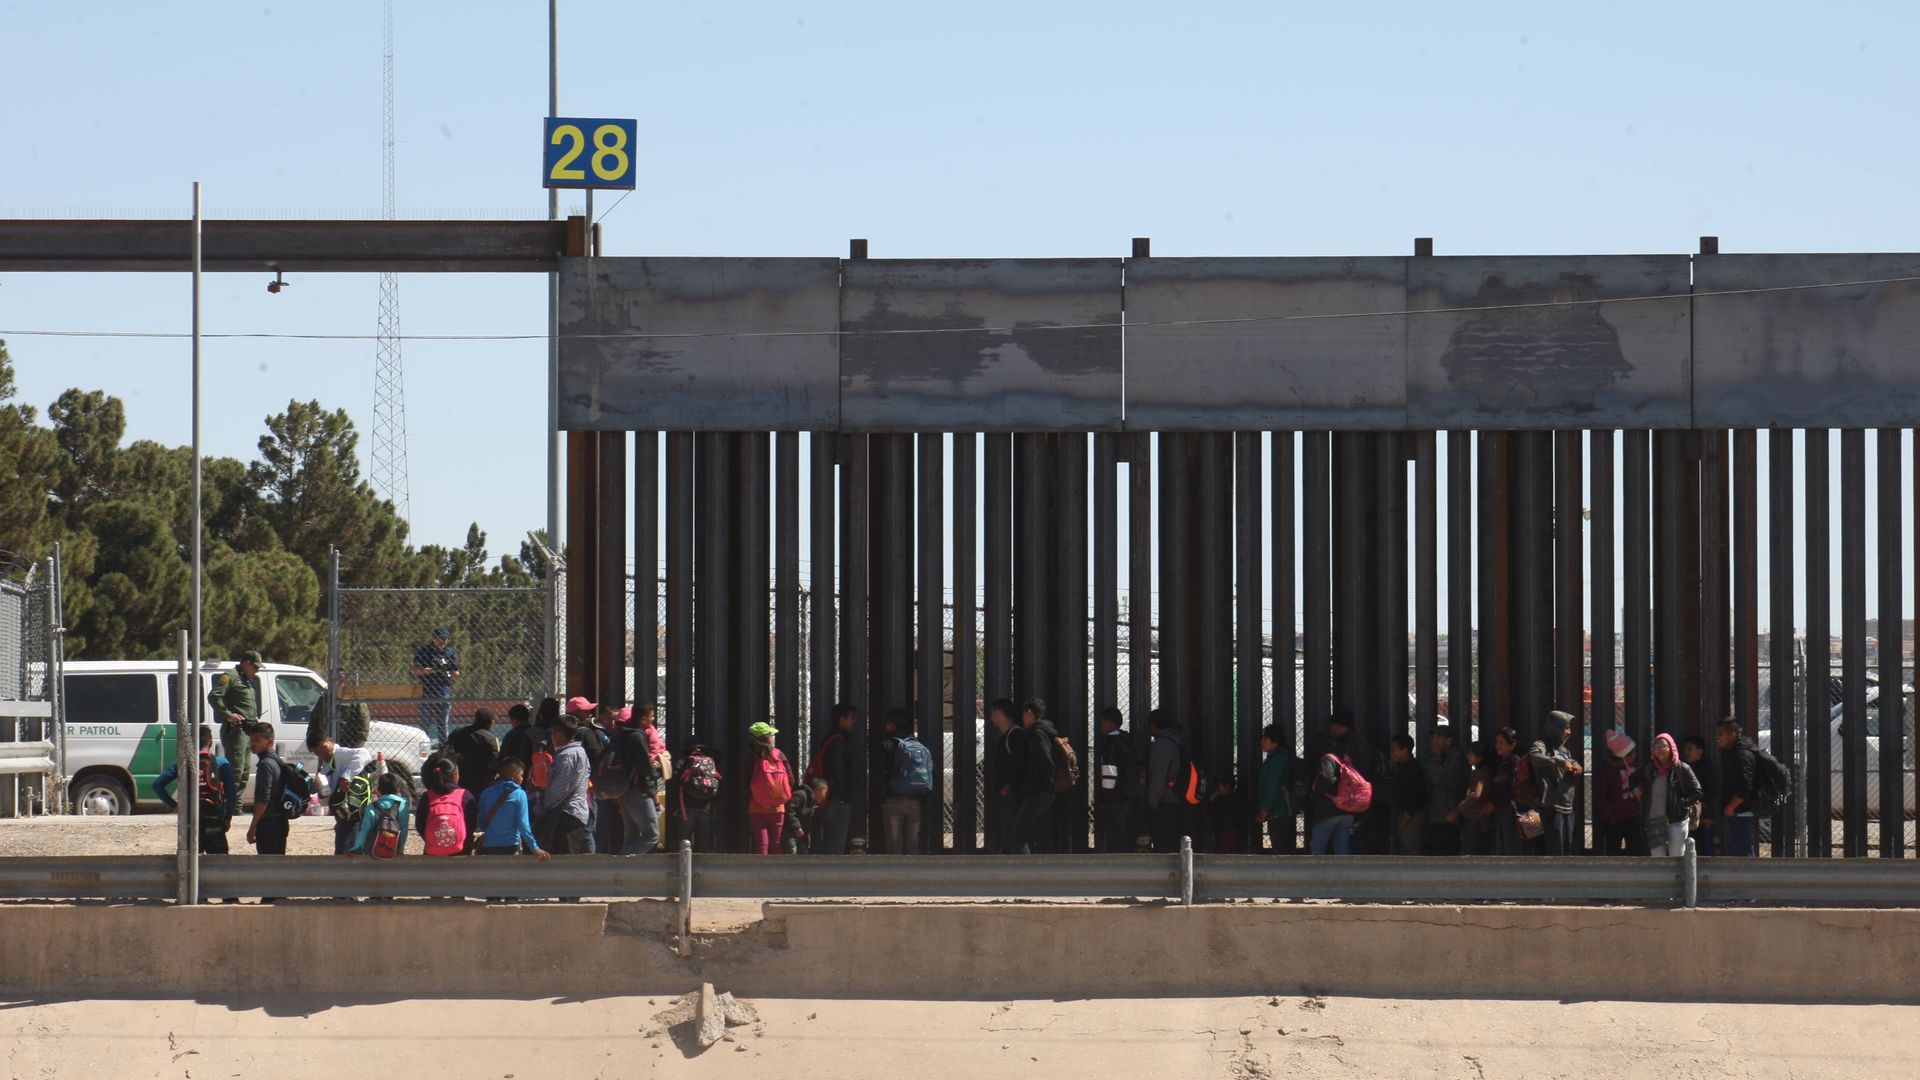 Many groups of Central American migrants were seen, crossing the border, the border patrol said that on average 1,000 migrants cross the border in the city Juarez the Paso Texas on April 22.